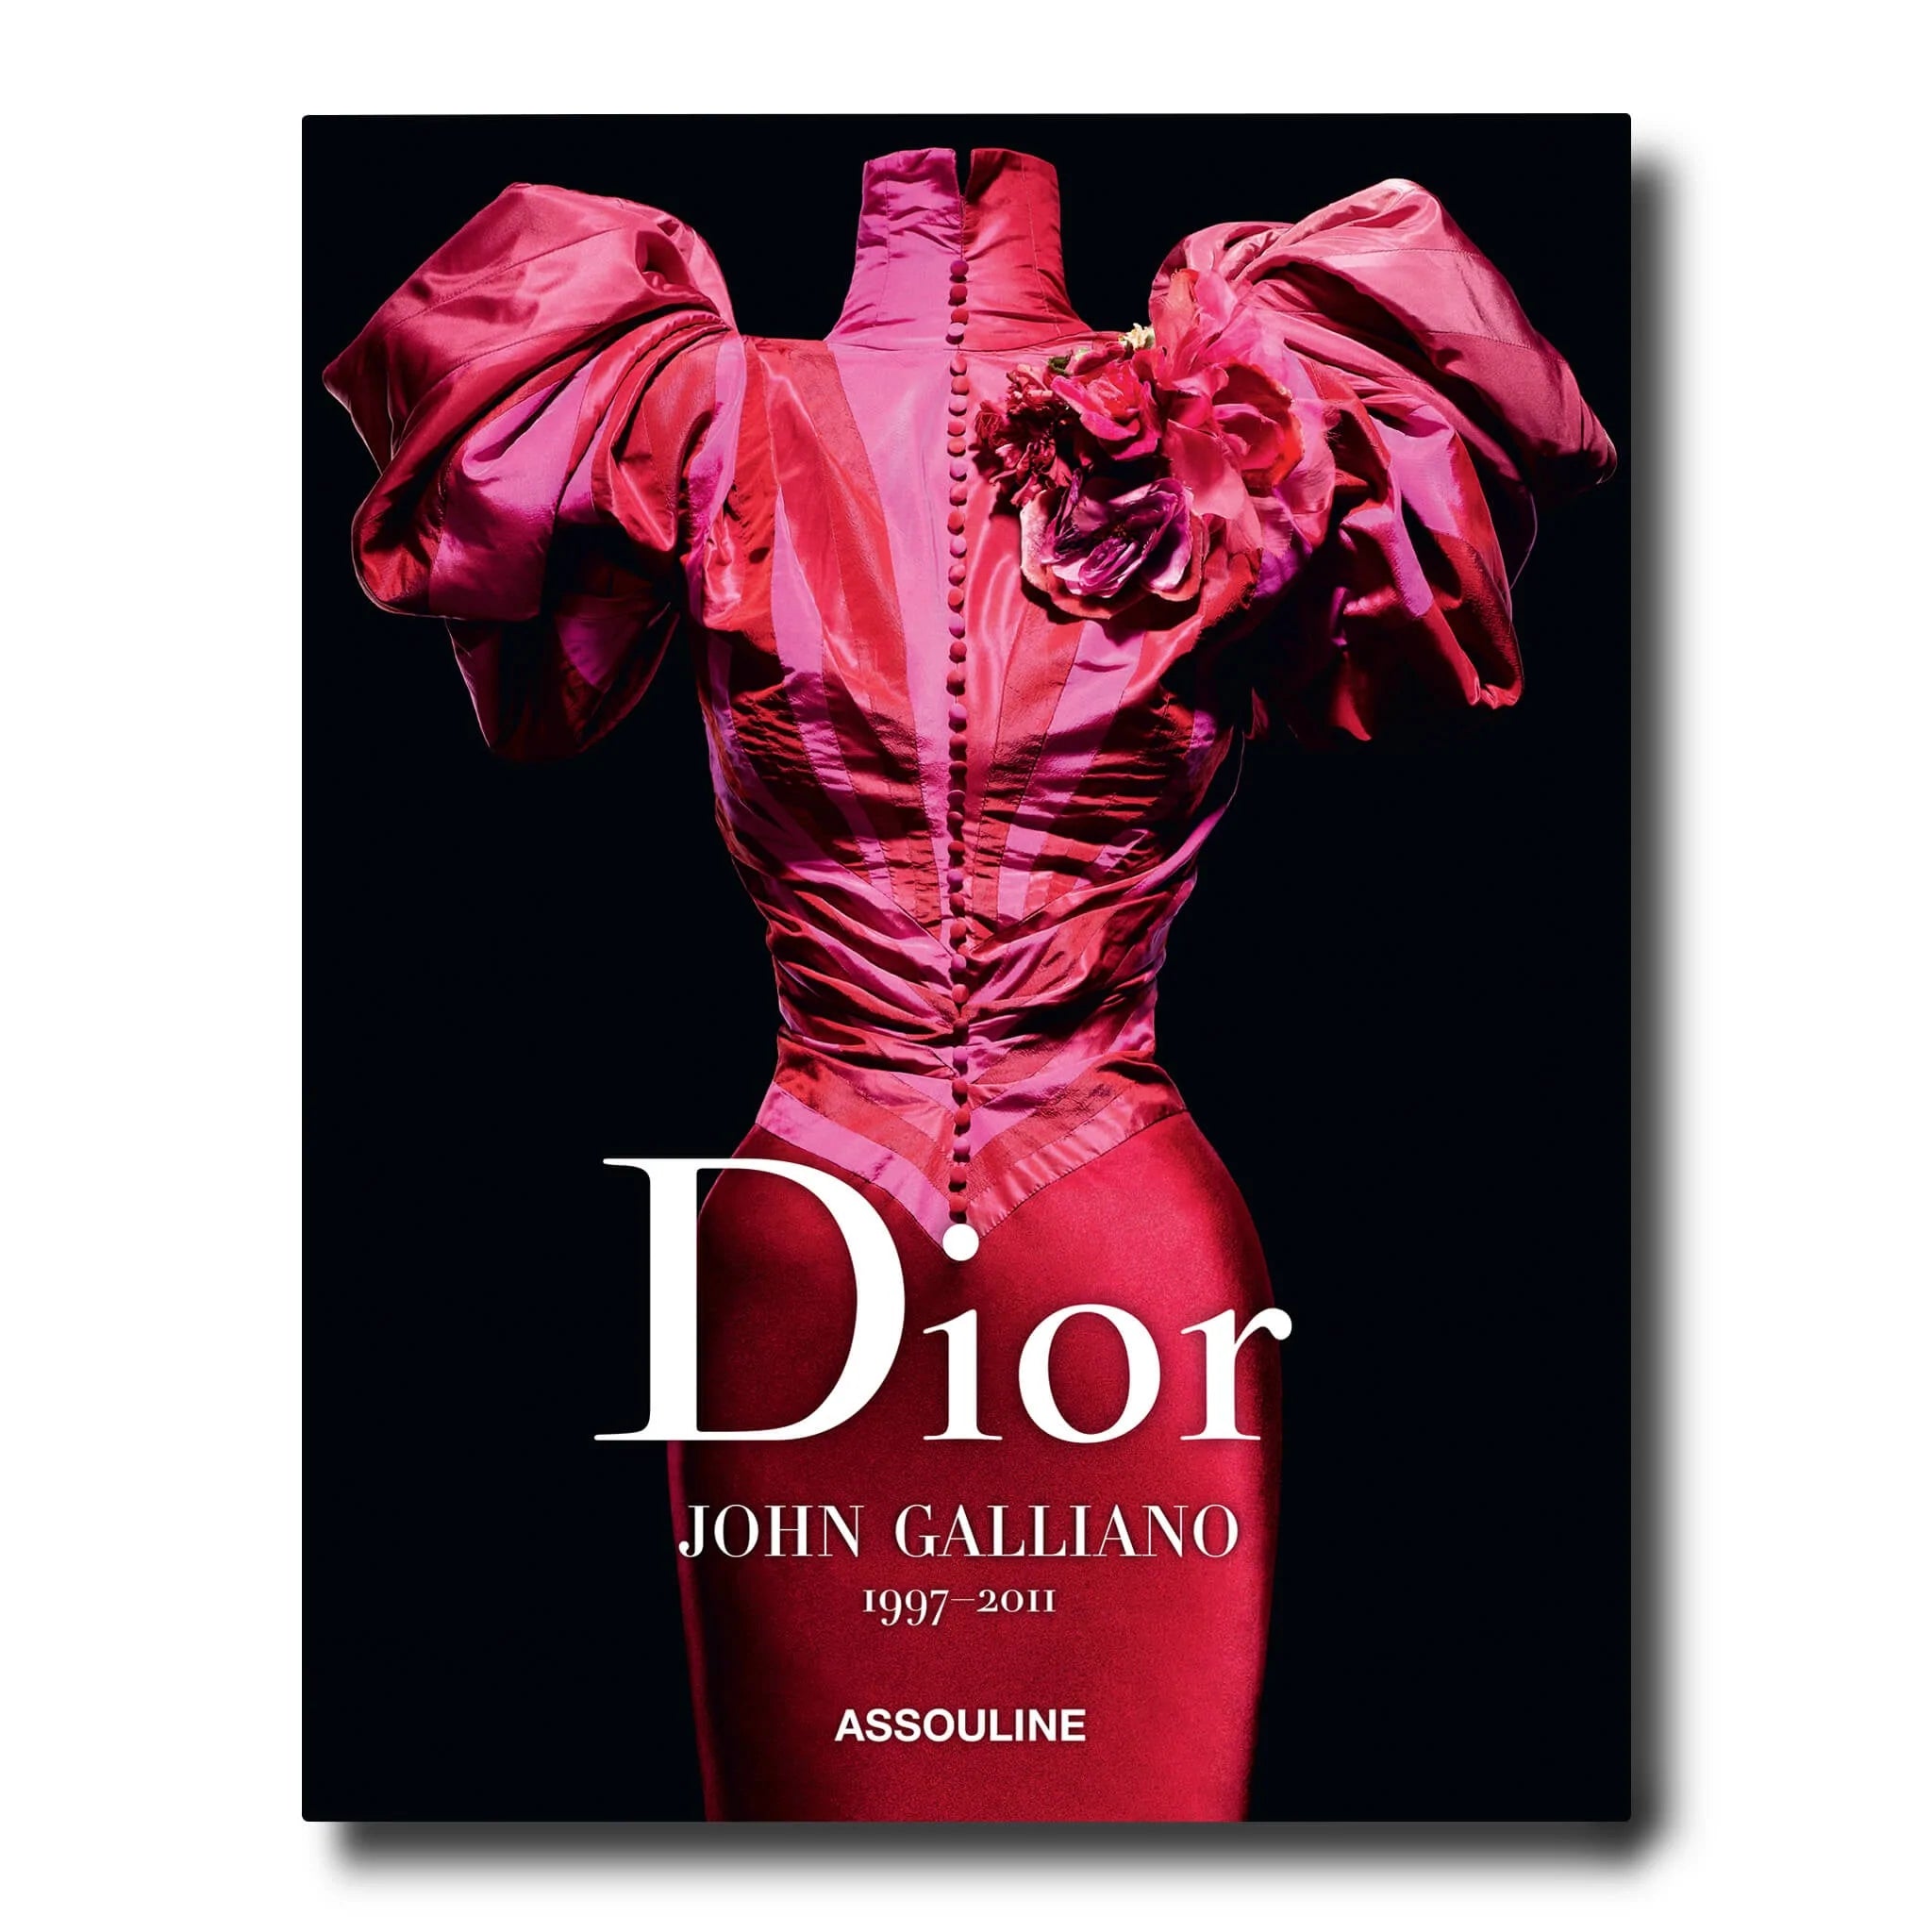 ♢ John Galliano: on some of his creations for the House of Dior ♢ 